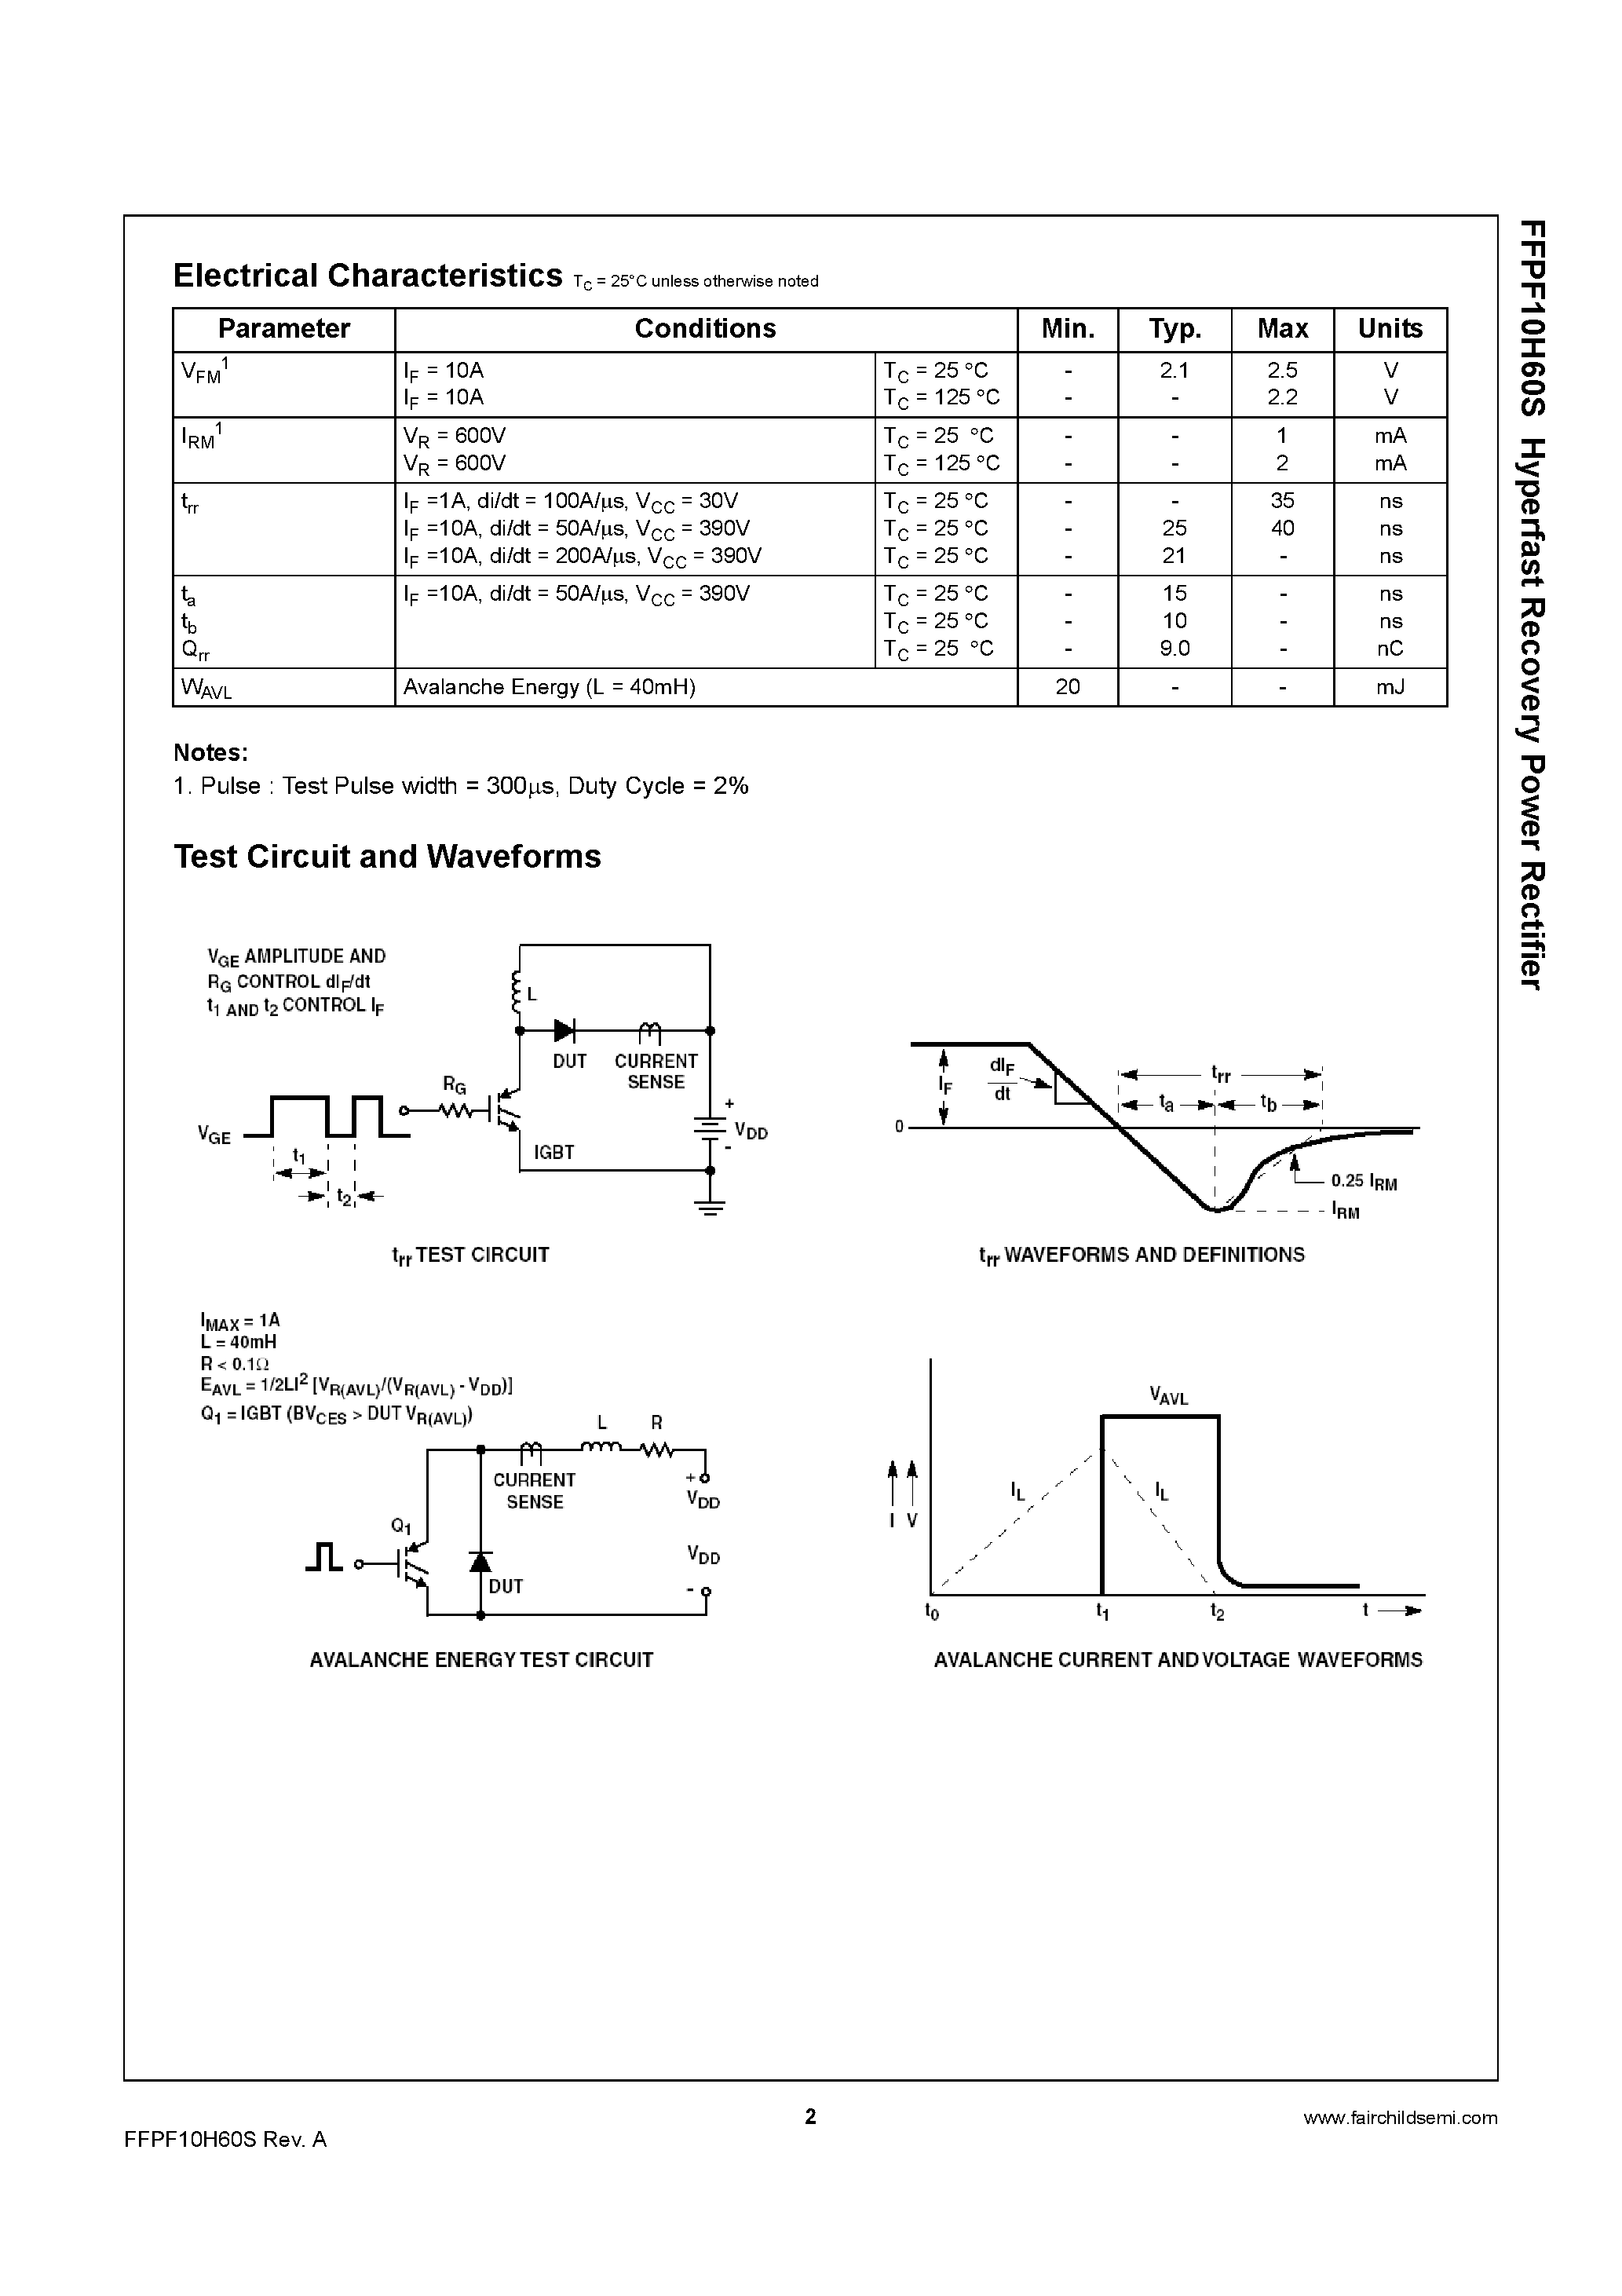 Datasheet FFPF10H60S - Hyperfast Recovery Power Rectifier page 2